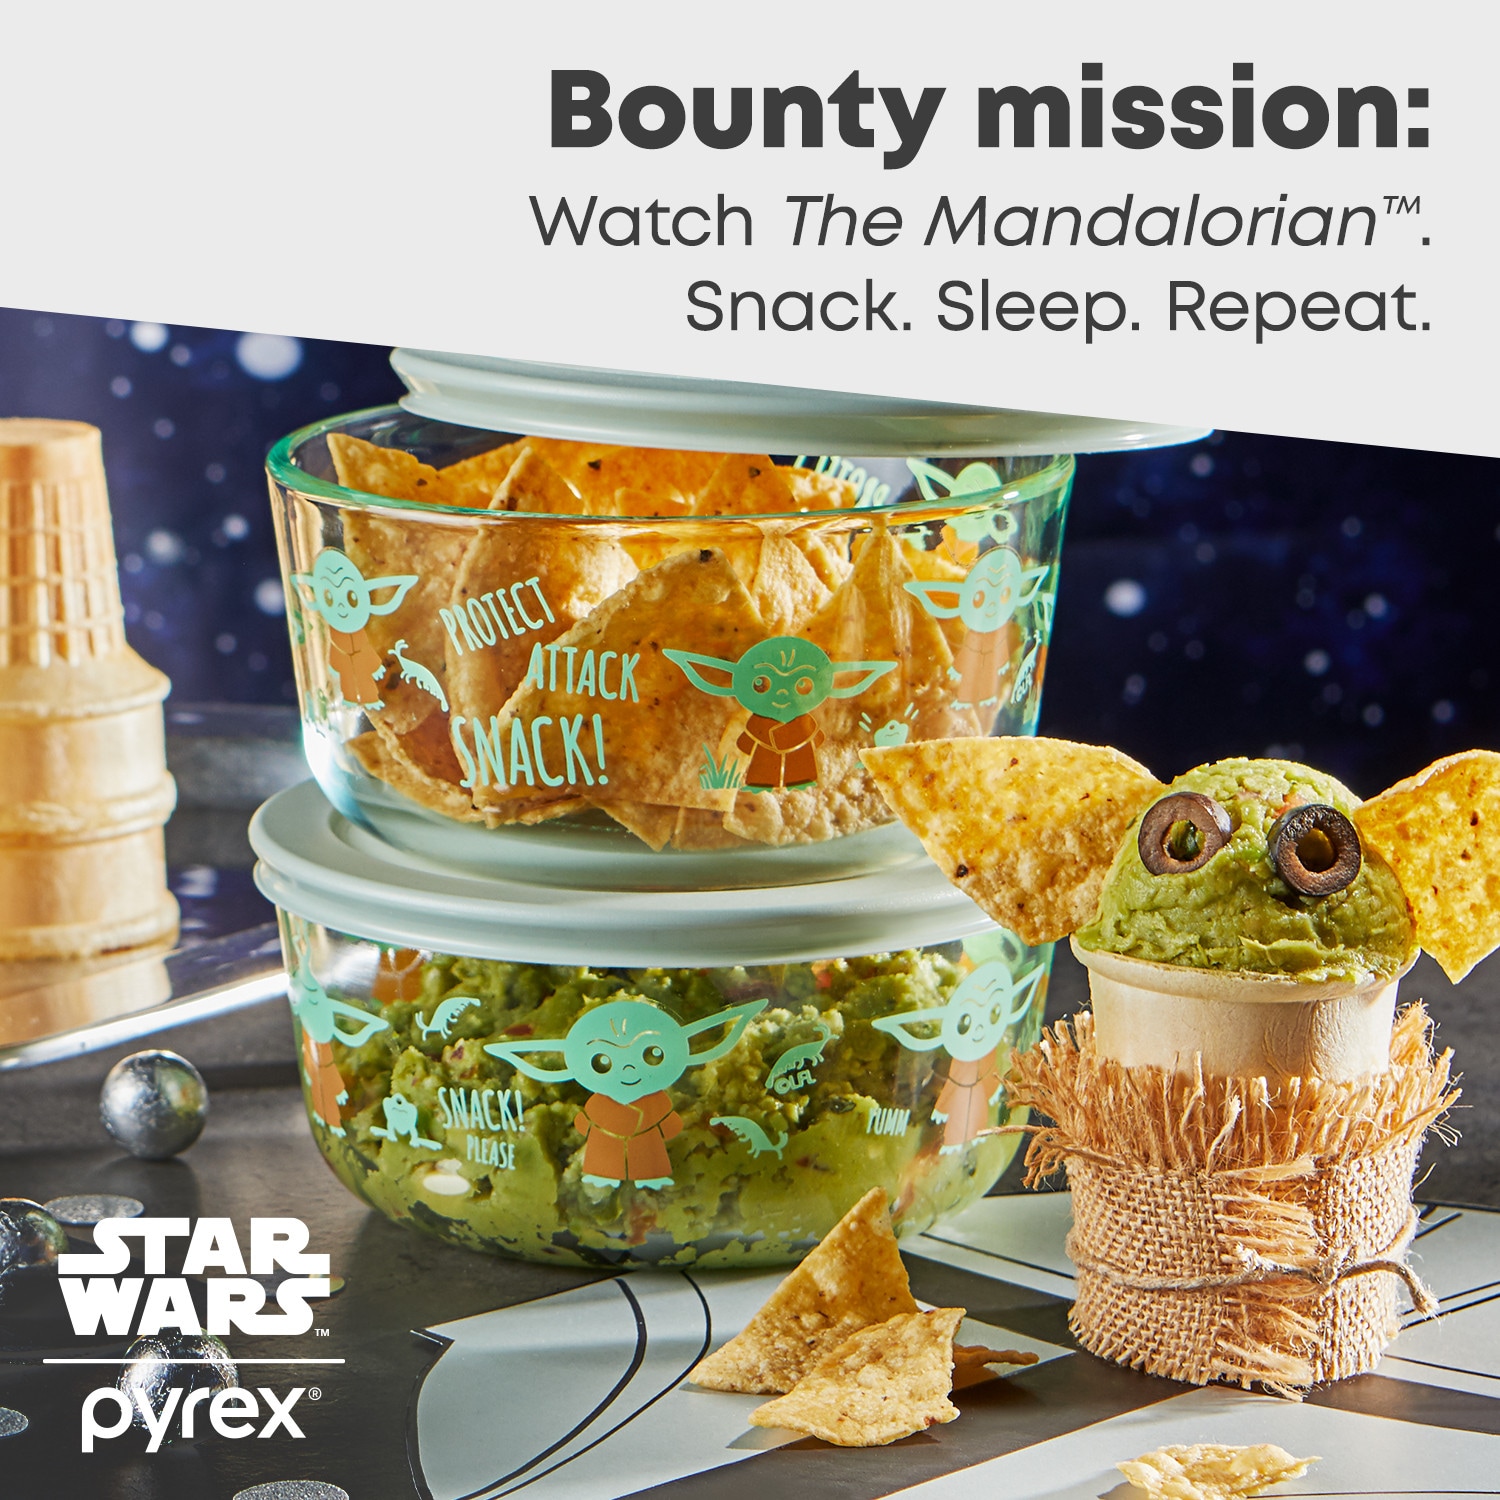 Incredible Star Wars Pyrex Storage Collection Is Strong With The